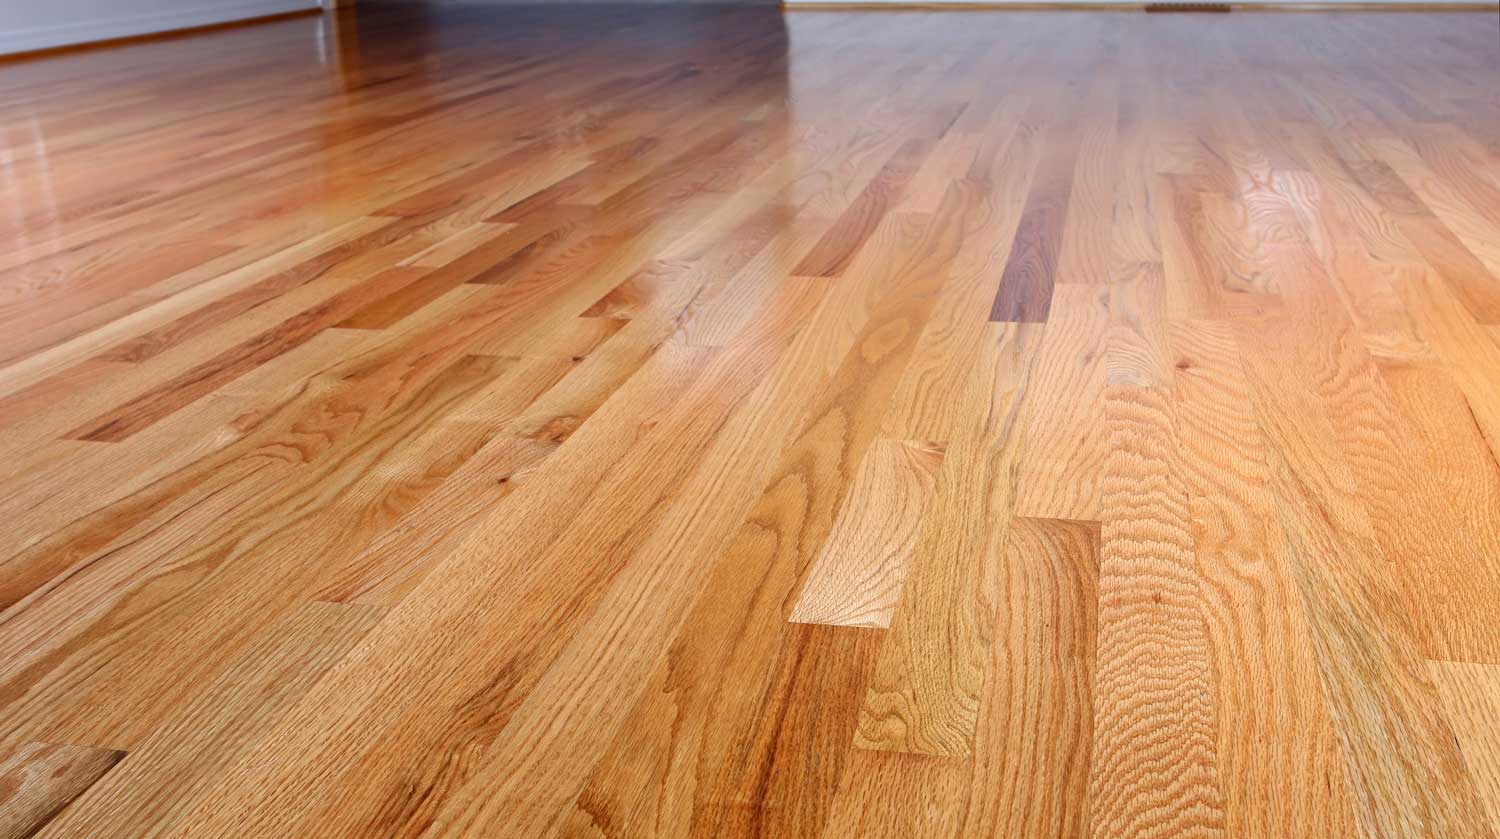 Cost To Refinish A Hardwood Floor, How Much Does Refinishing Hardwood Floors Cost